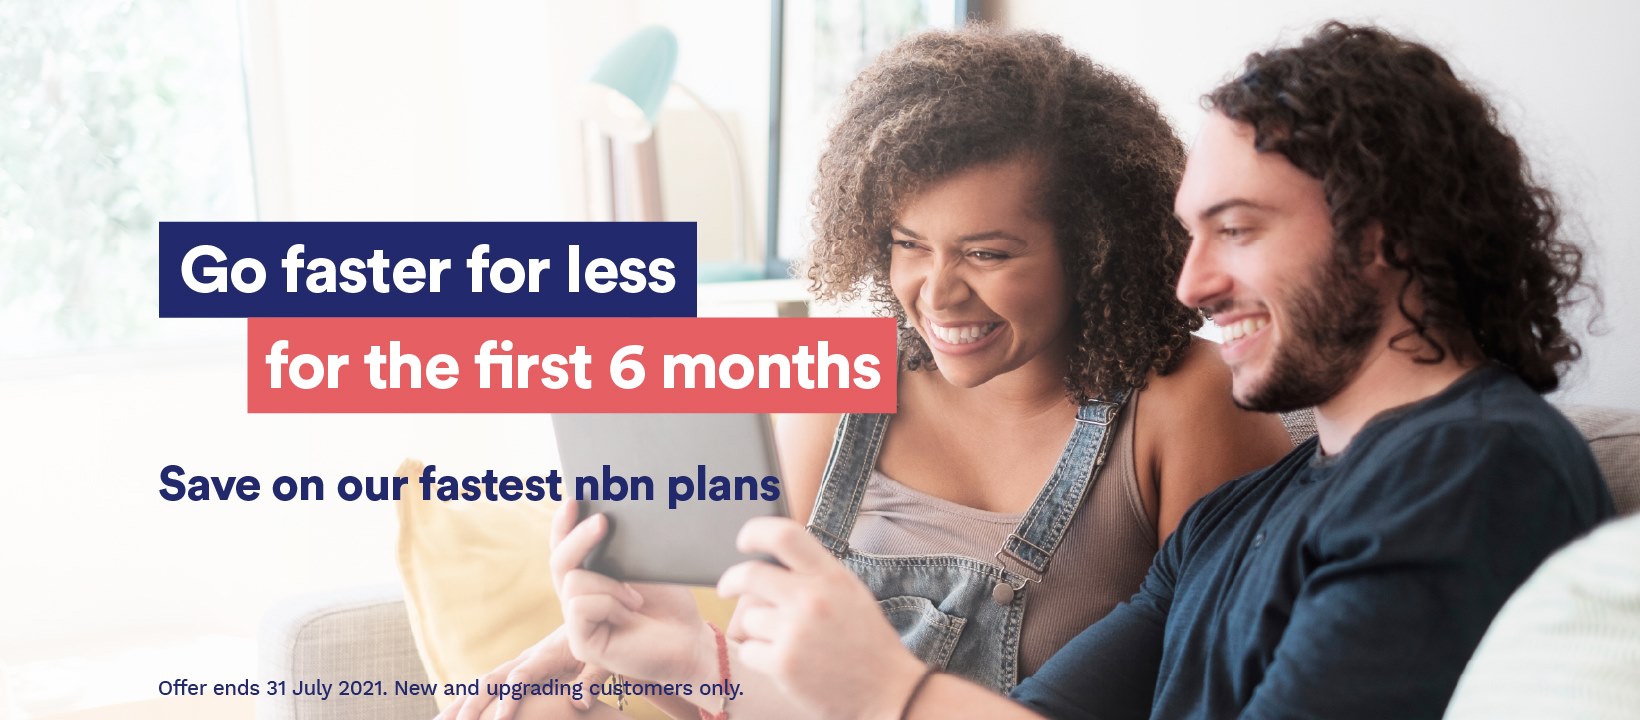 Up to $25 OFF per month on NBN plans